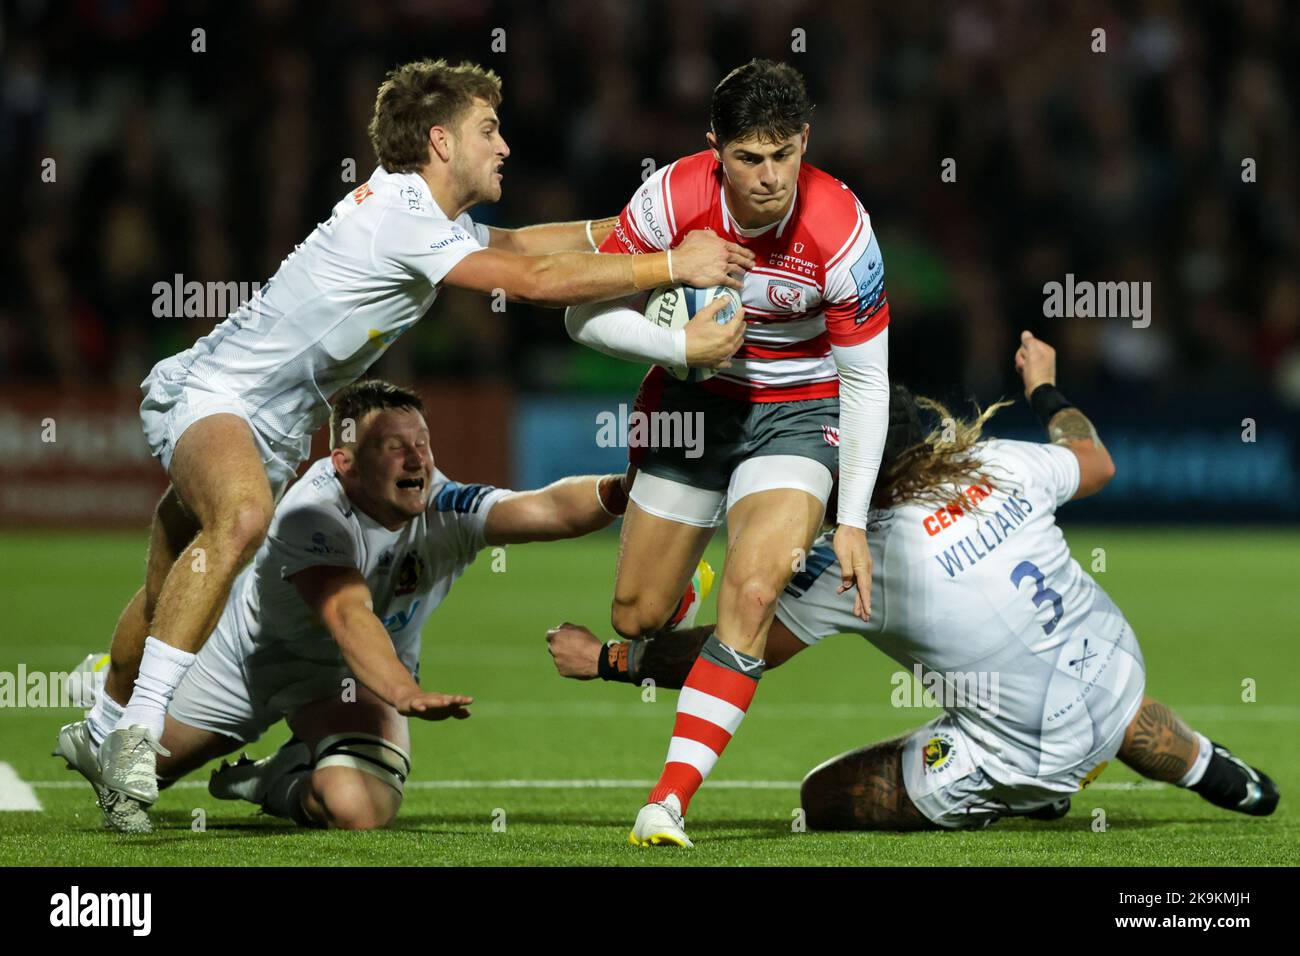 Louis Rees-Zammit of Gloucester Rugby bursts towards the Exeter Chiefs try line during the Gallagher Premiership match Gloucester Rugby vs Exeter Chiefs at Kingsholm Stadium , Gloucester, United Kingdom, 28th October 2022 (